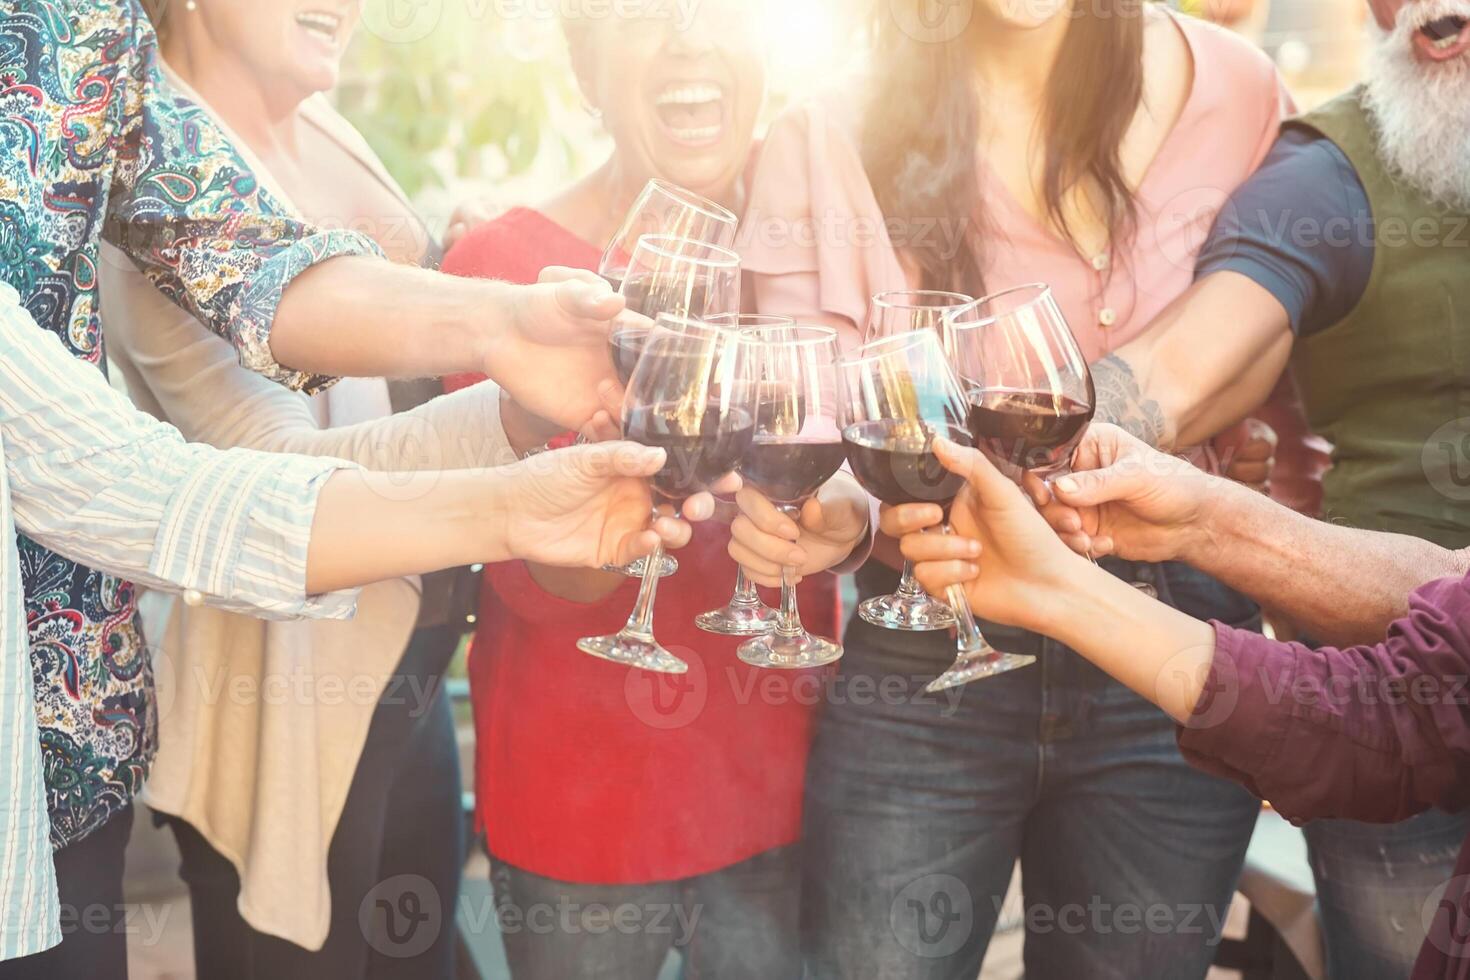 Happy family toasting with red wine glasses at dinner outdoor - People having fun cheering and drinking while dining together - Food and beverage weekend lifestyle activities photo